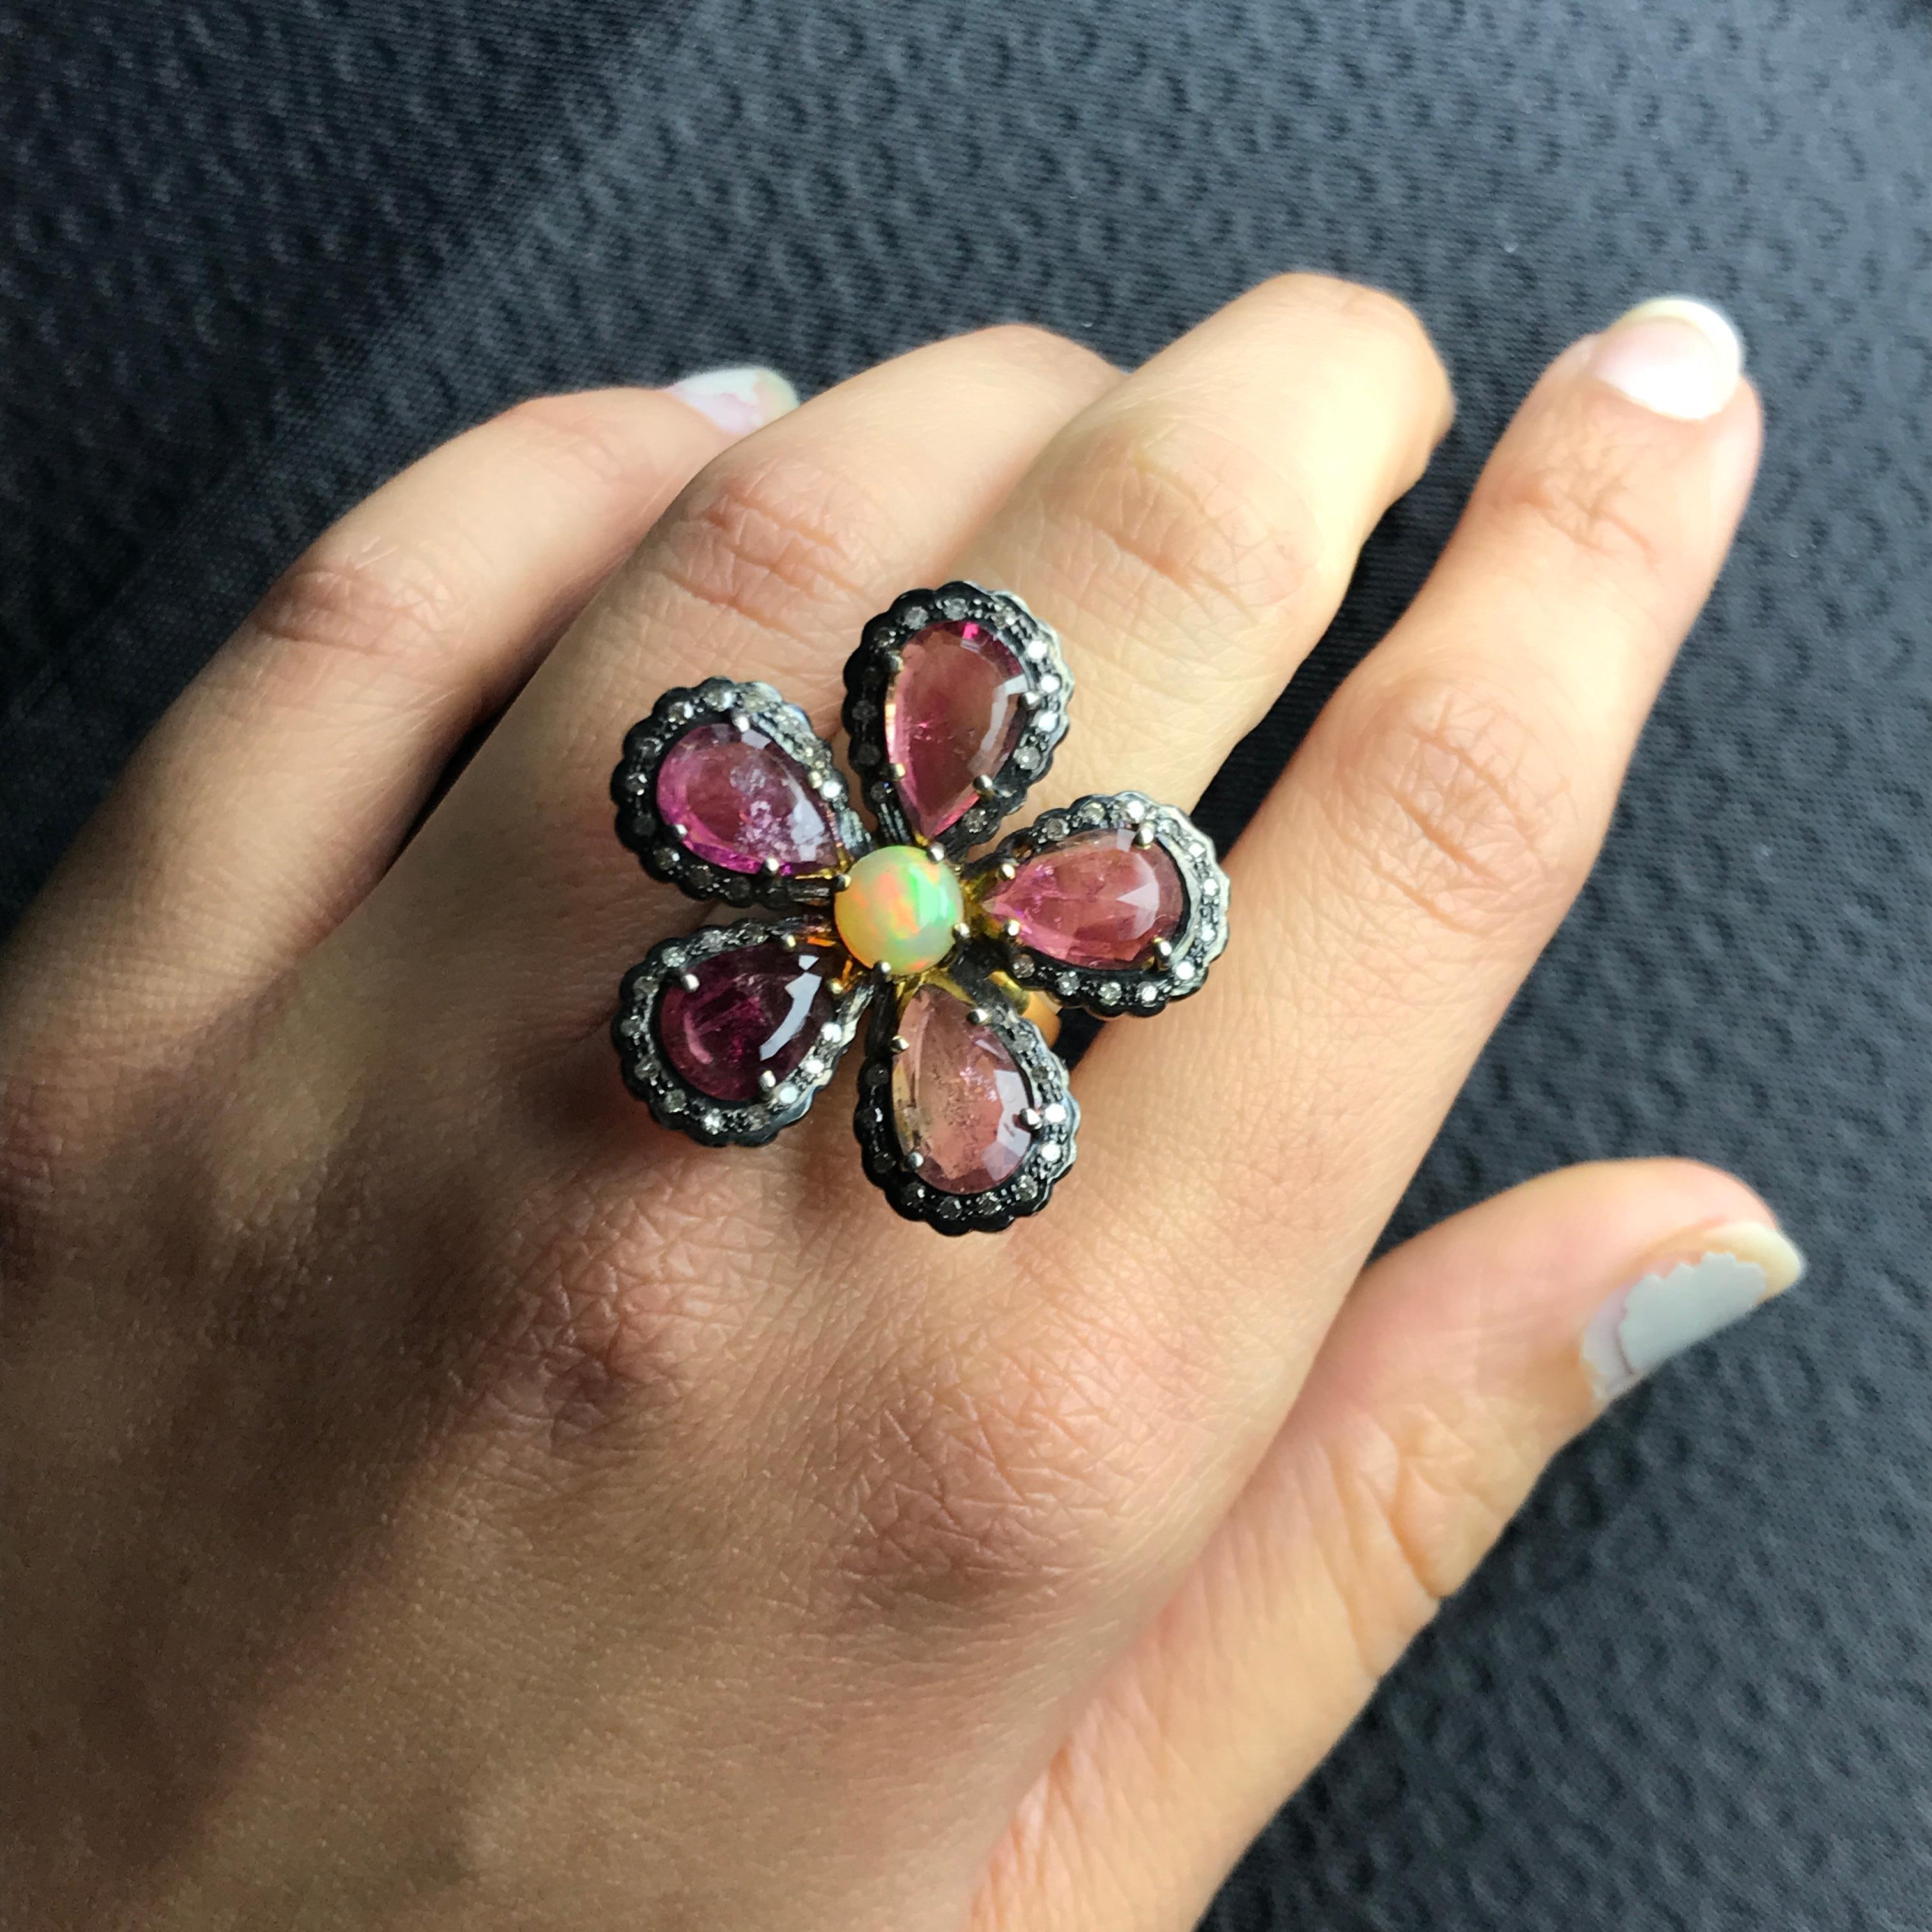 A stunning, statement floral design ring with Tourmaline, Opal and Diamond set in silver. The black rhodium polish gives the ring a beautiful, antique look. Currently a size 6.5, can be resized. 